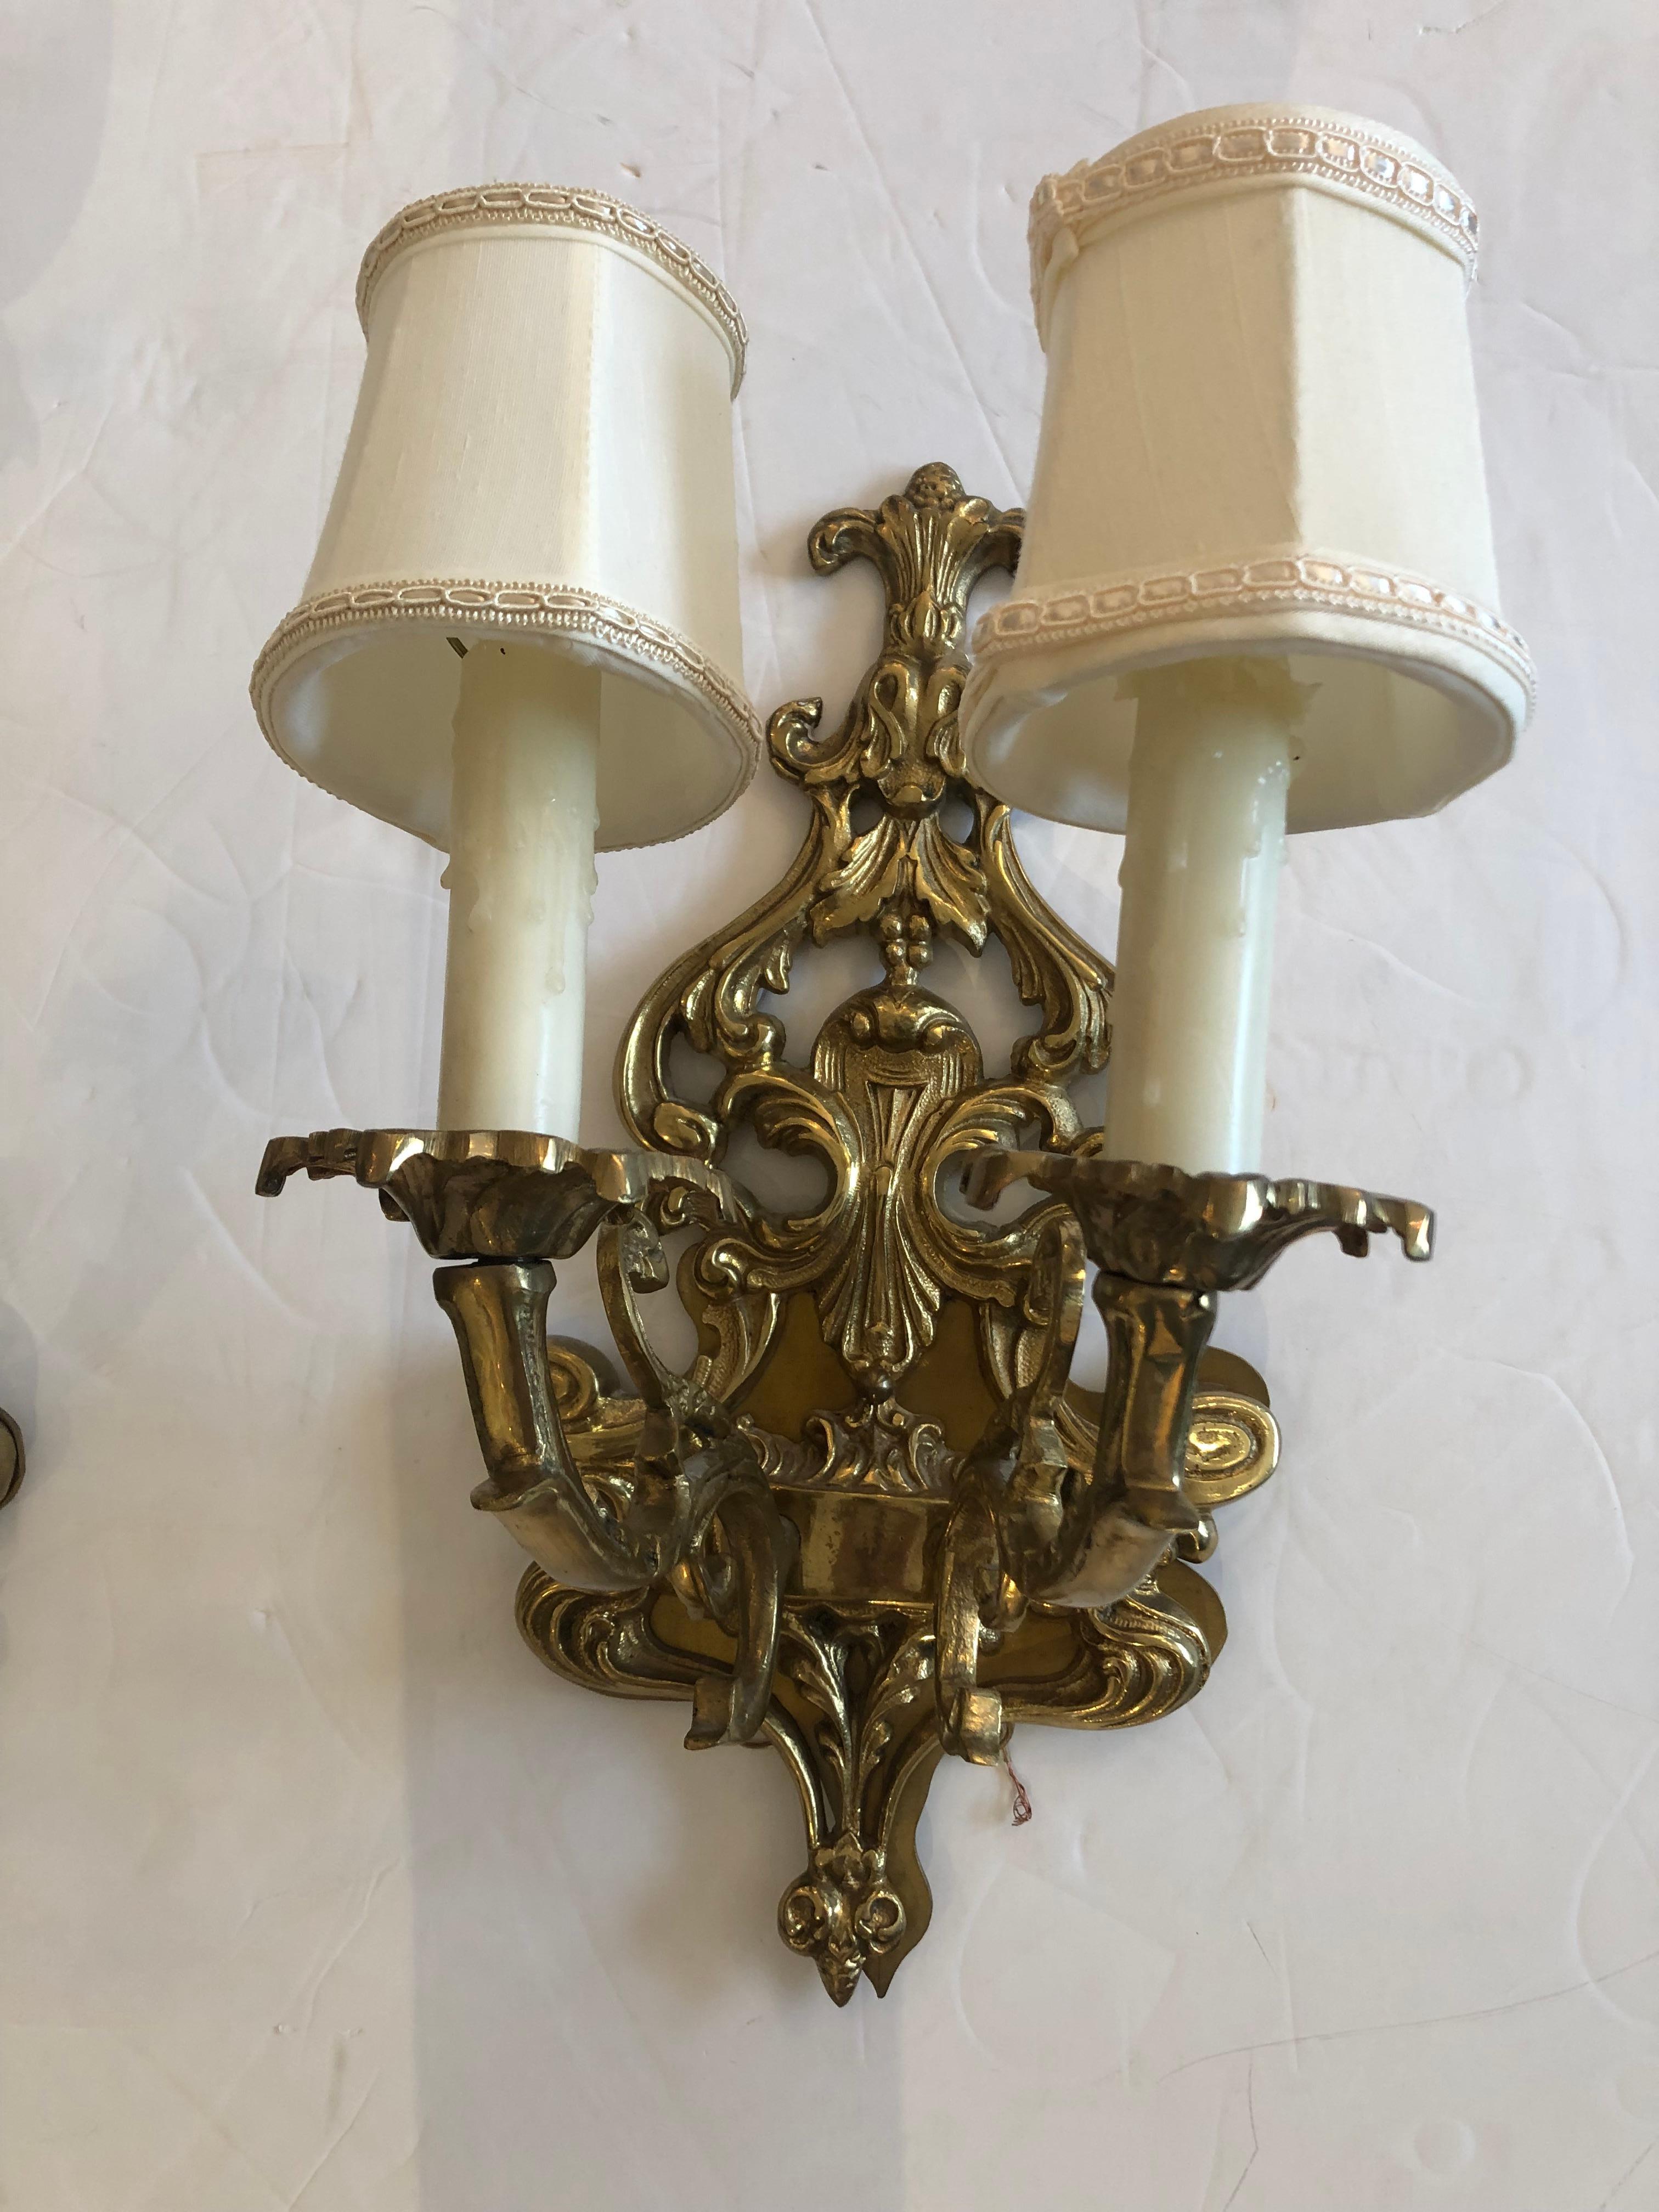 Beautiful medium sized brass wall sconces with 2 arms each and pretty silk shades.